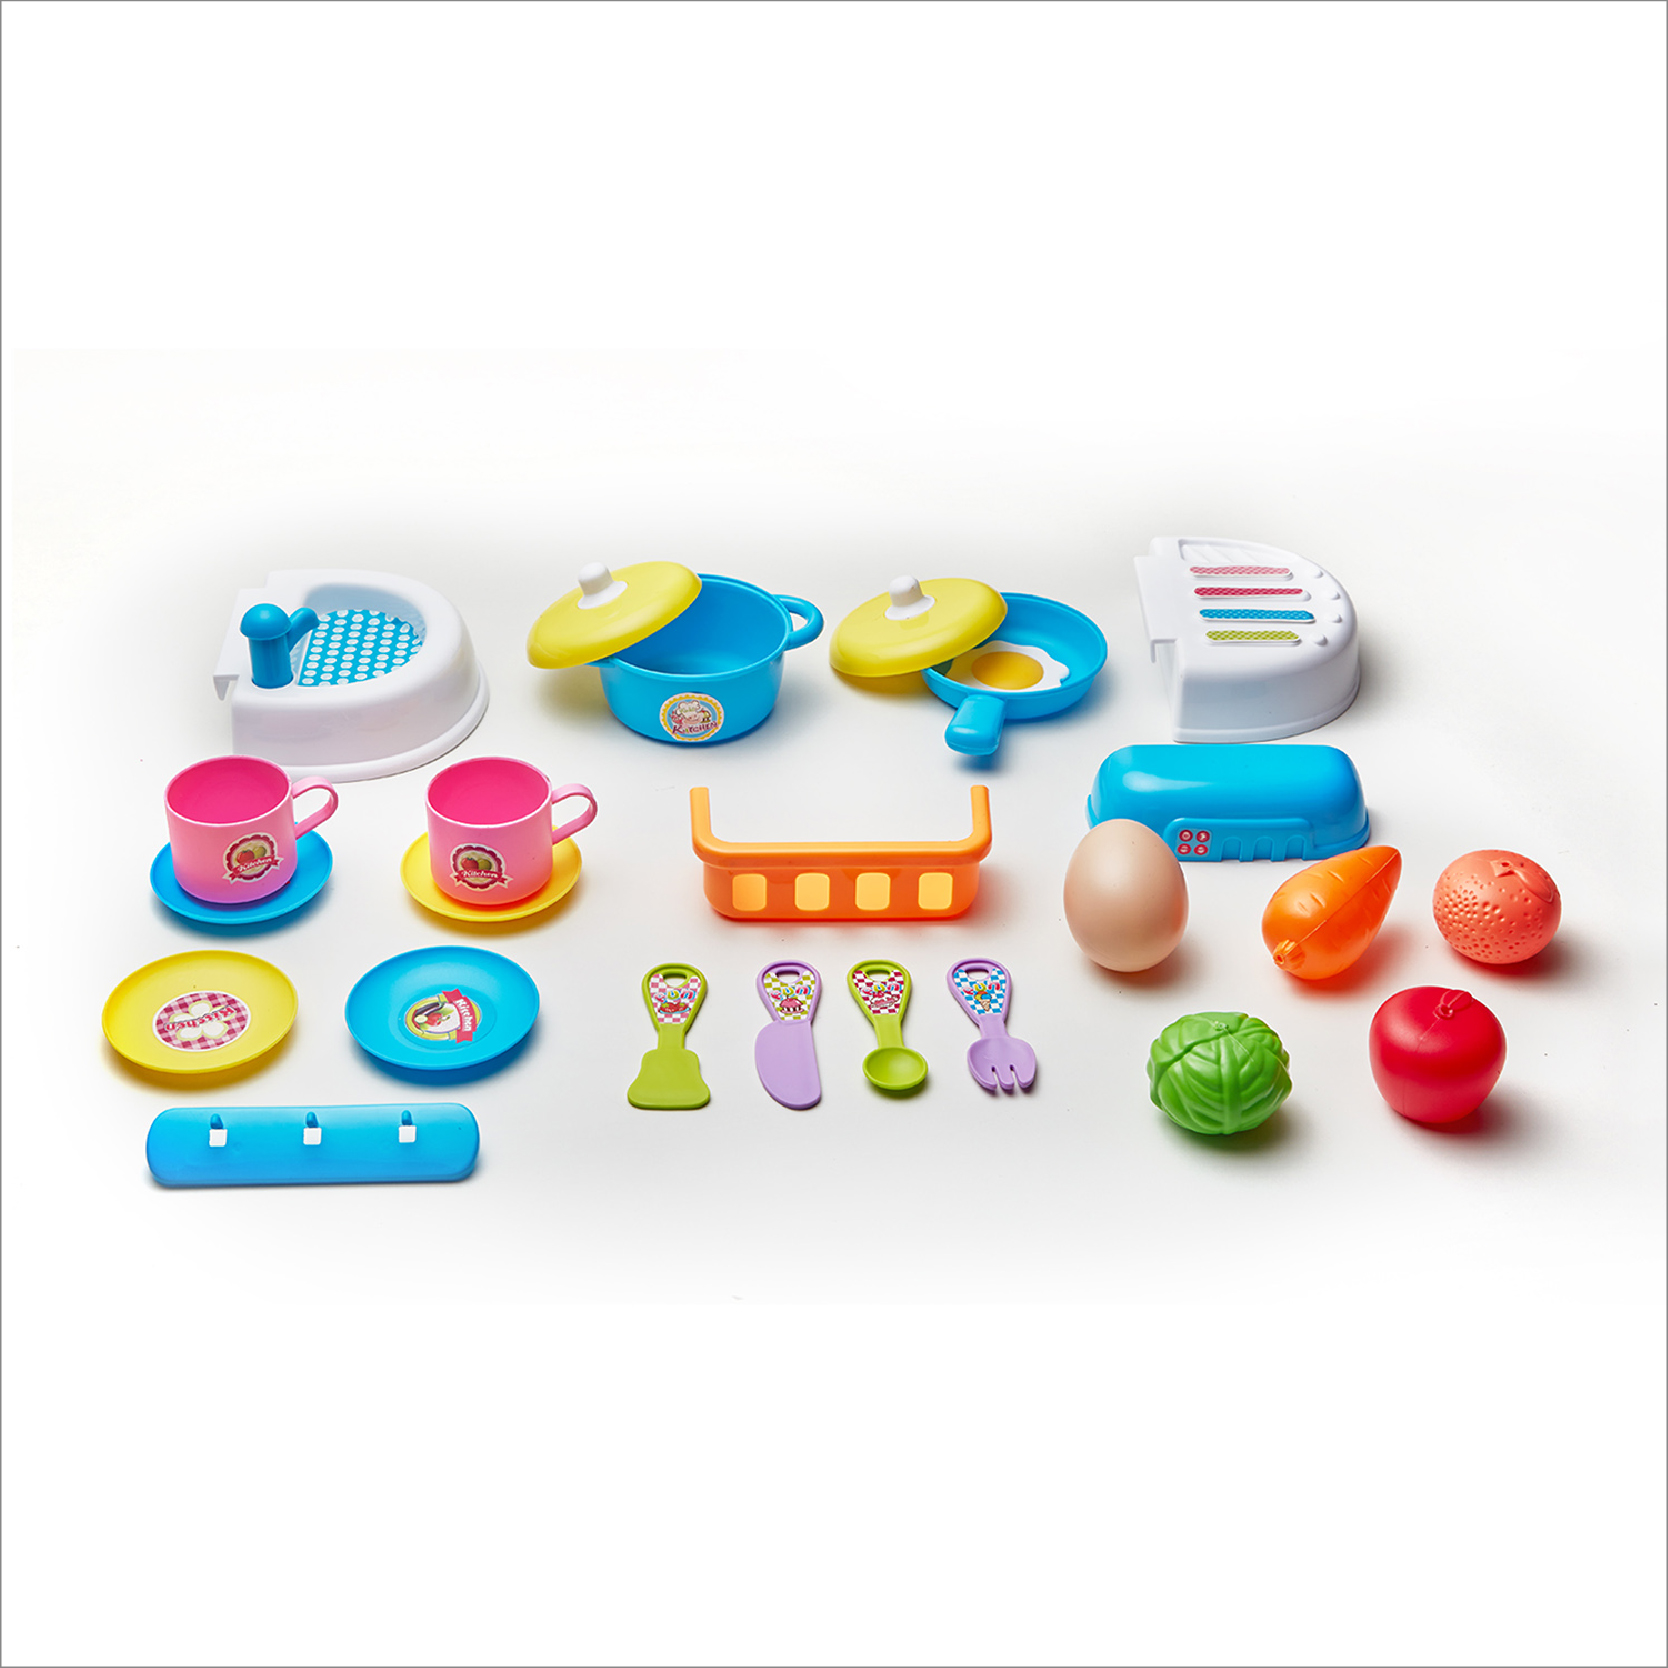 Cooking set for Kids - Product photoshoot